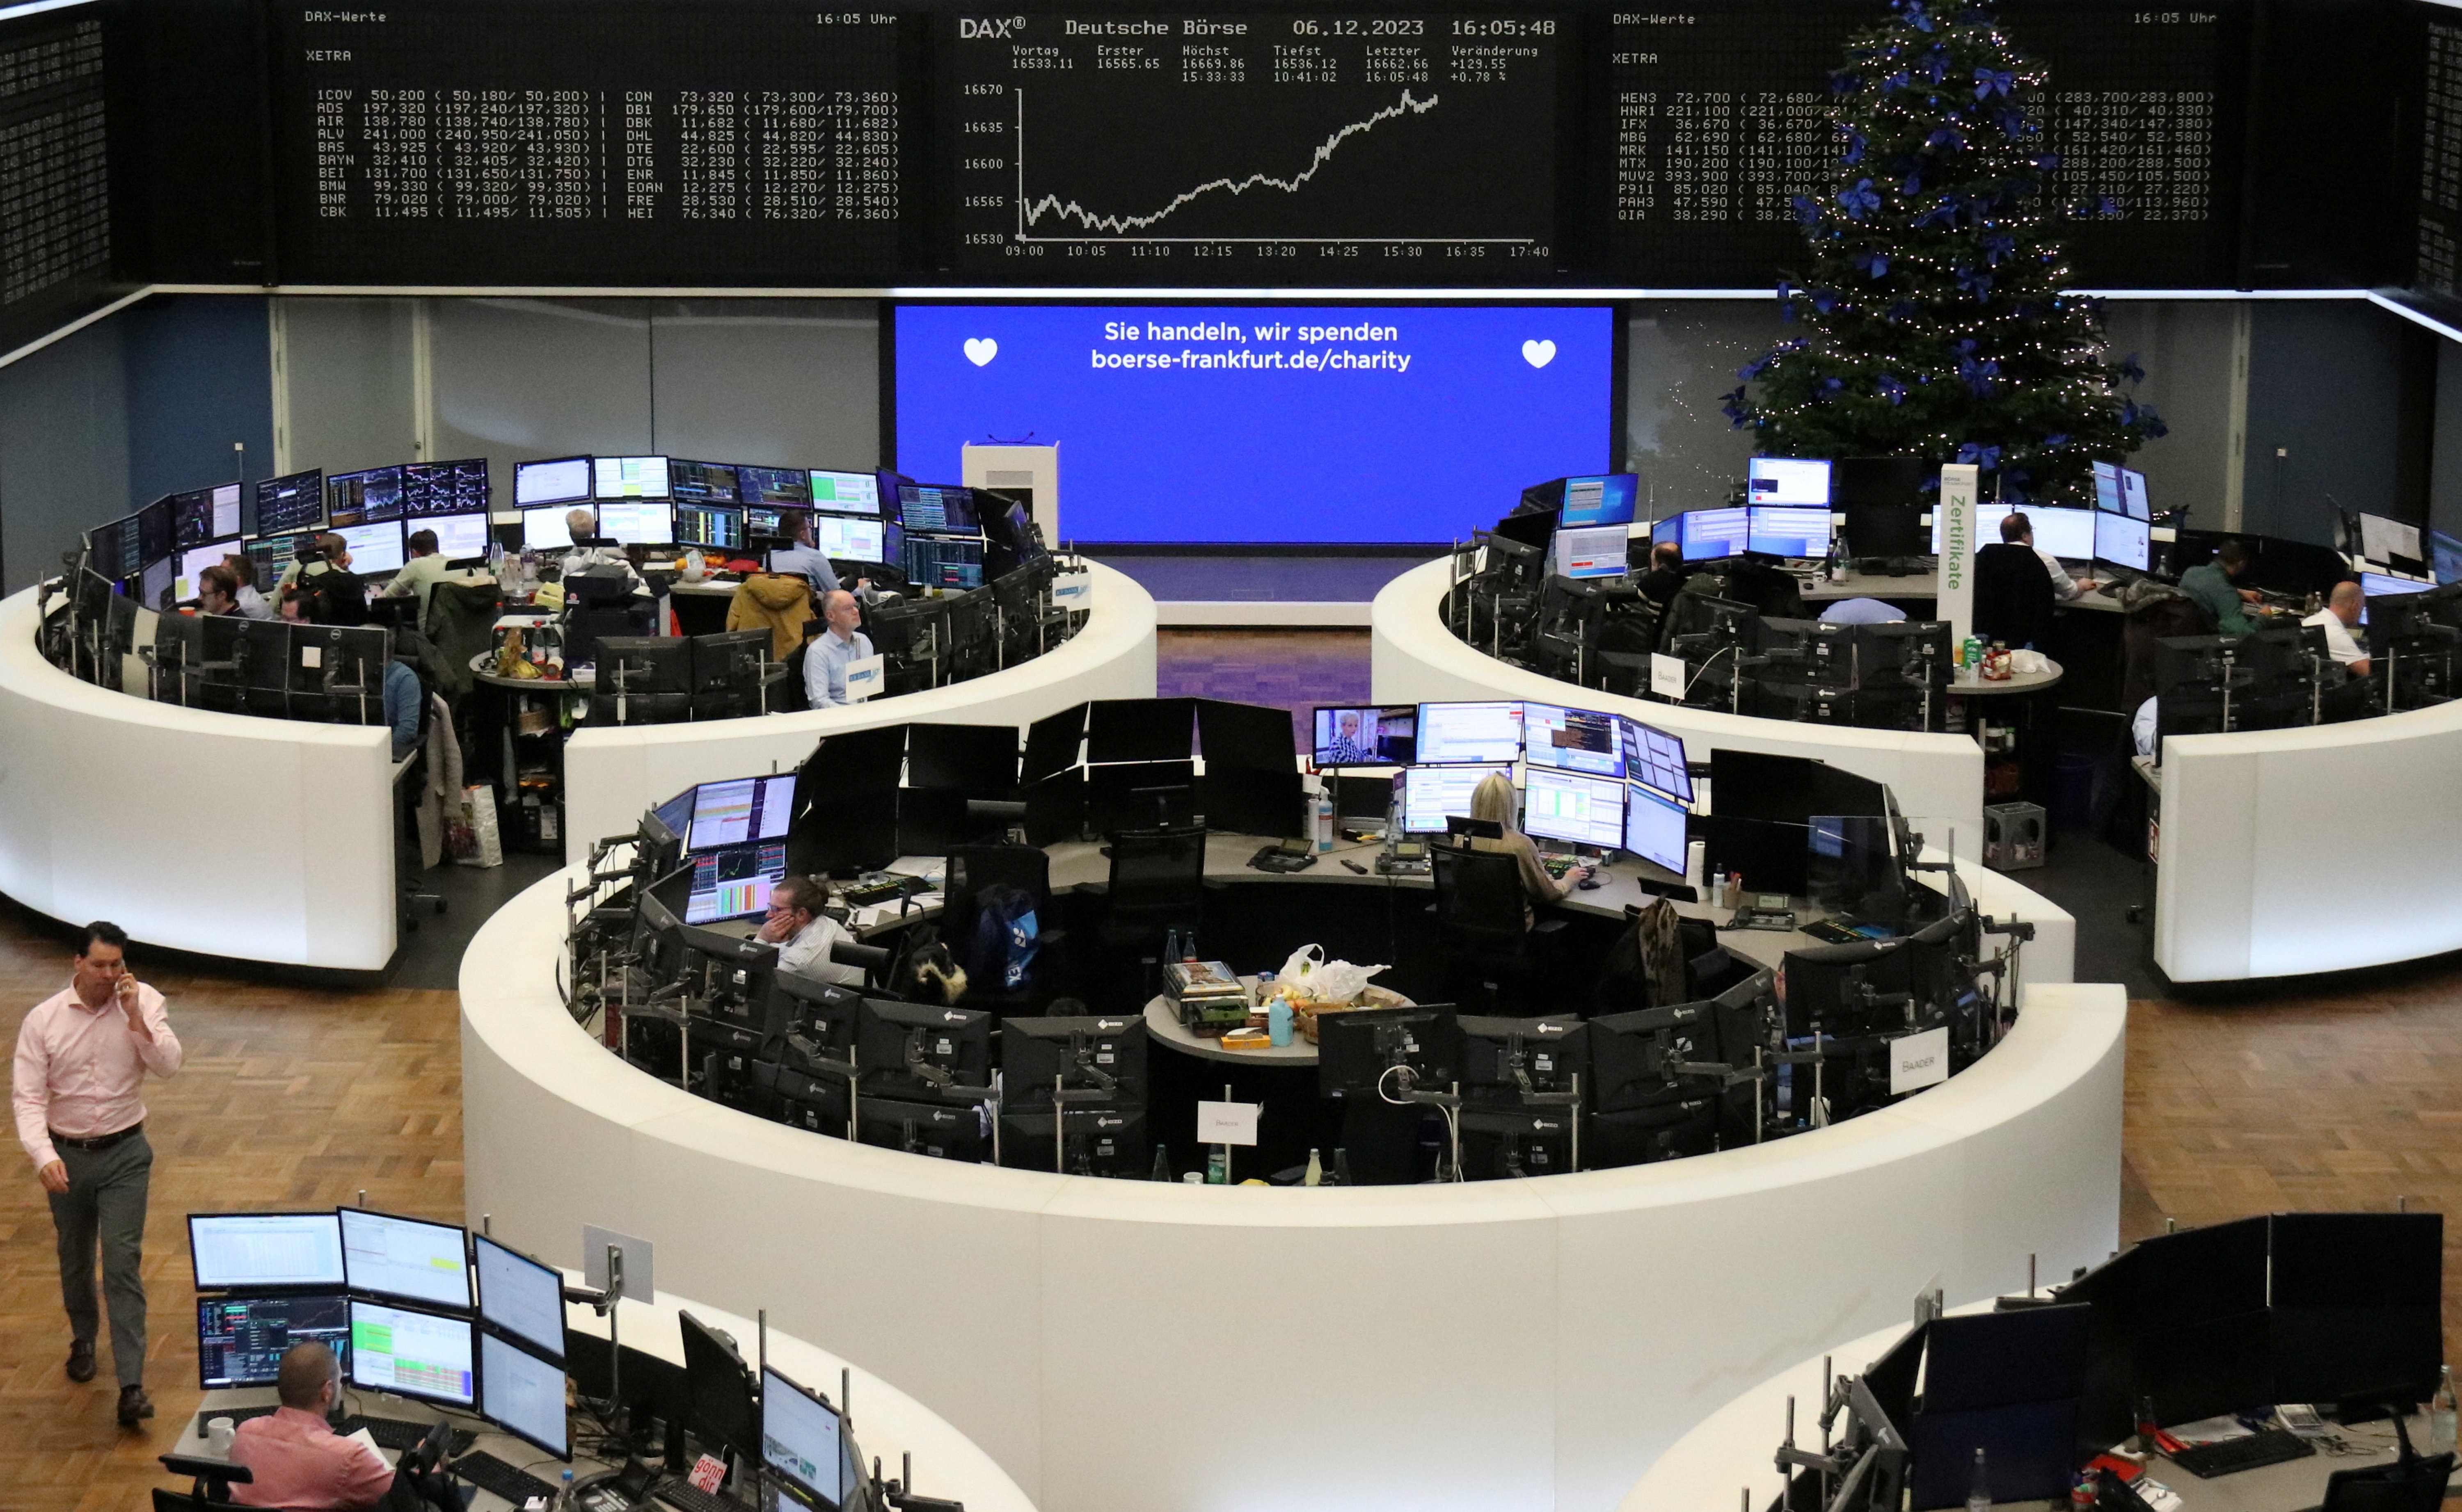 European shares hit near 22-month highs on luxury boost